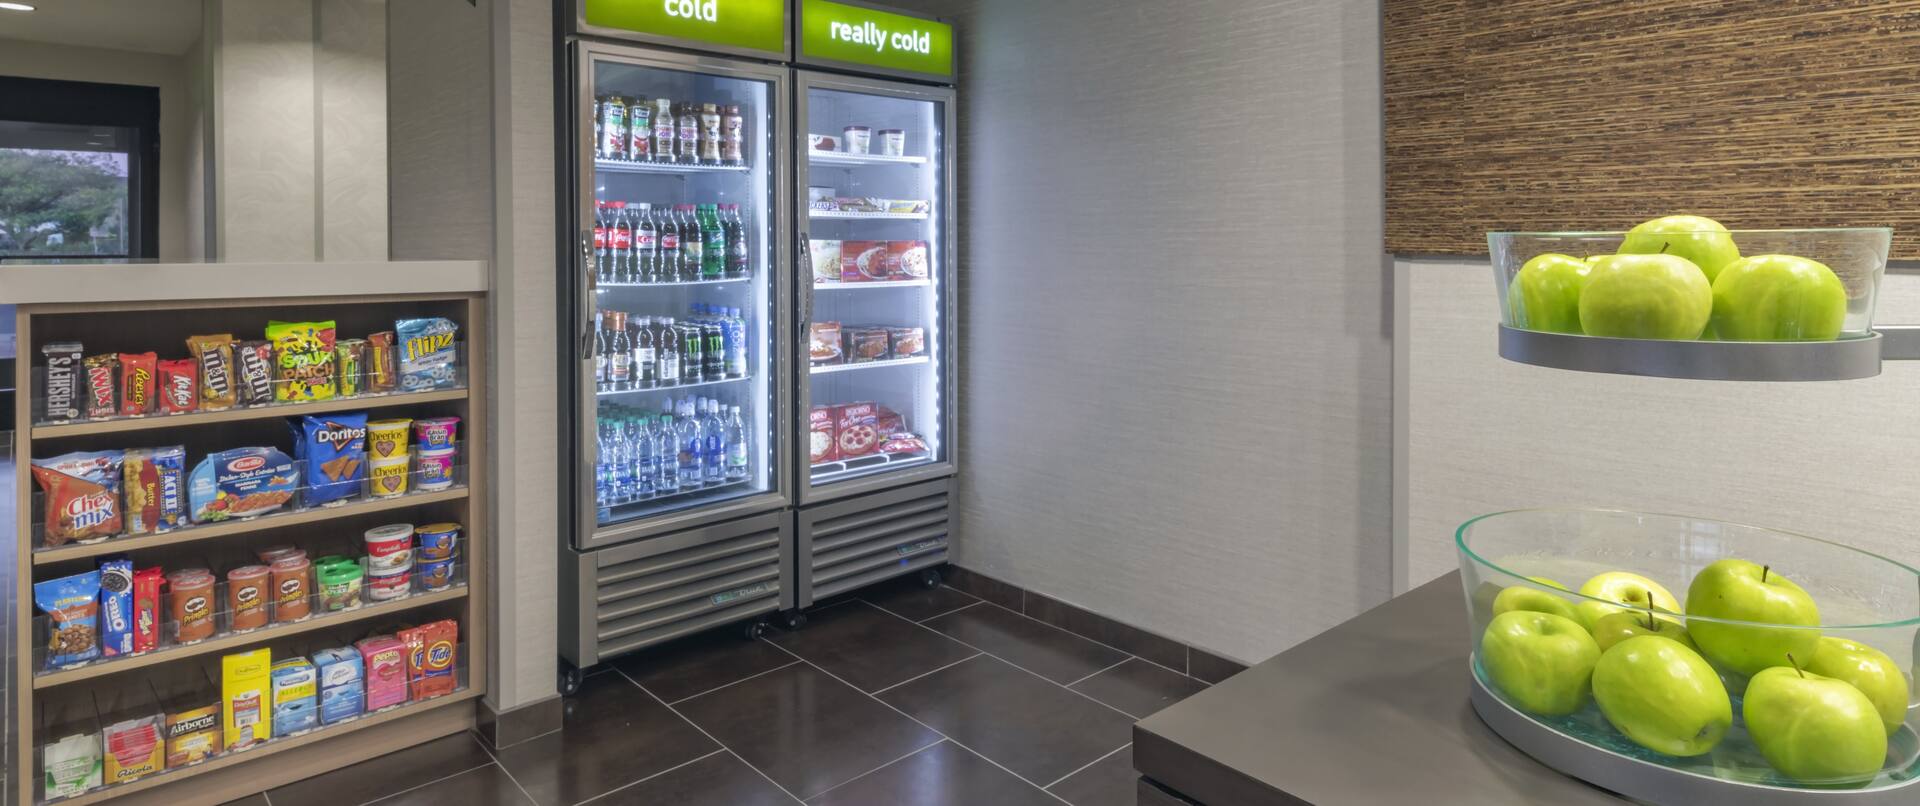 On-Site Snack Shop with Snacks Cabinet and Soft Drinks Refridgerator